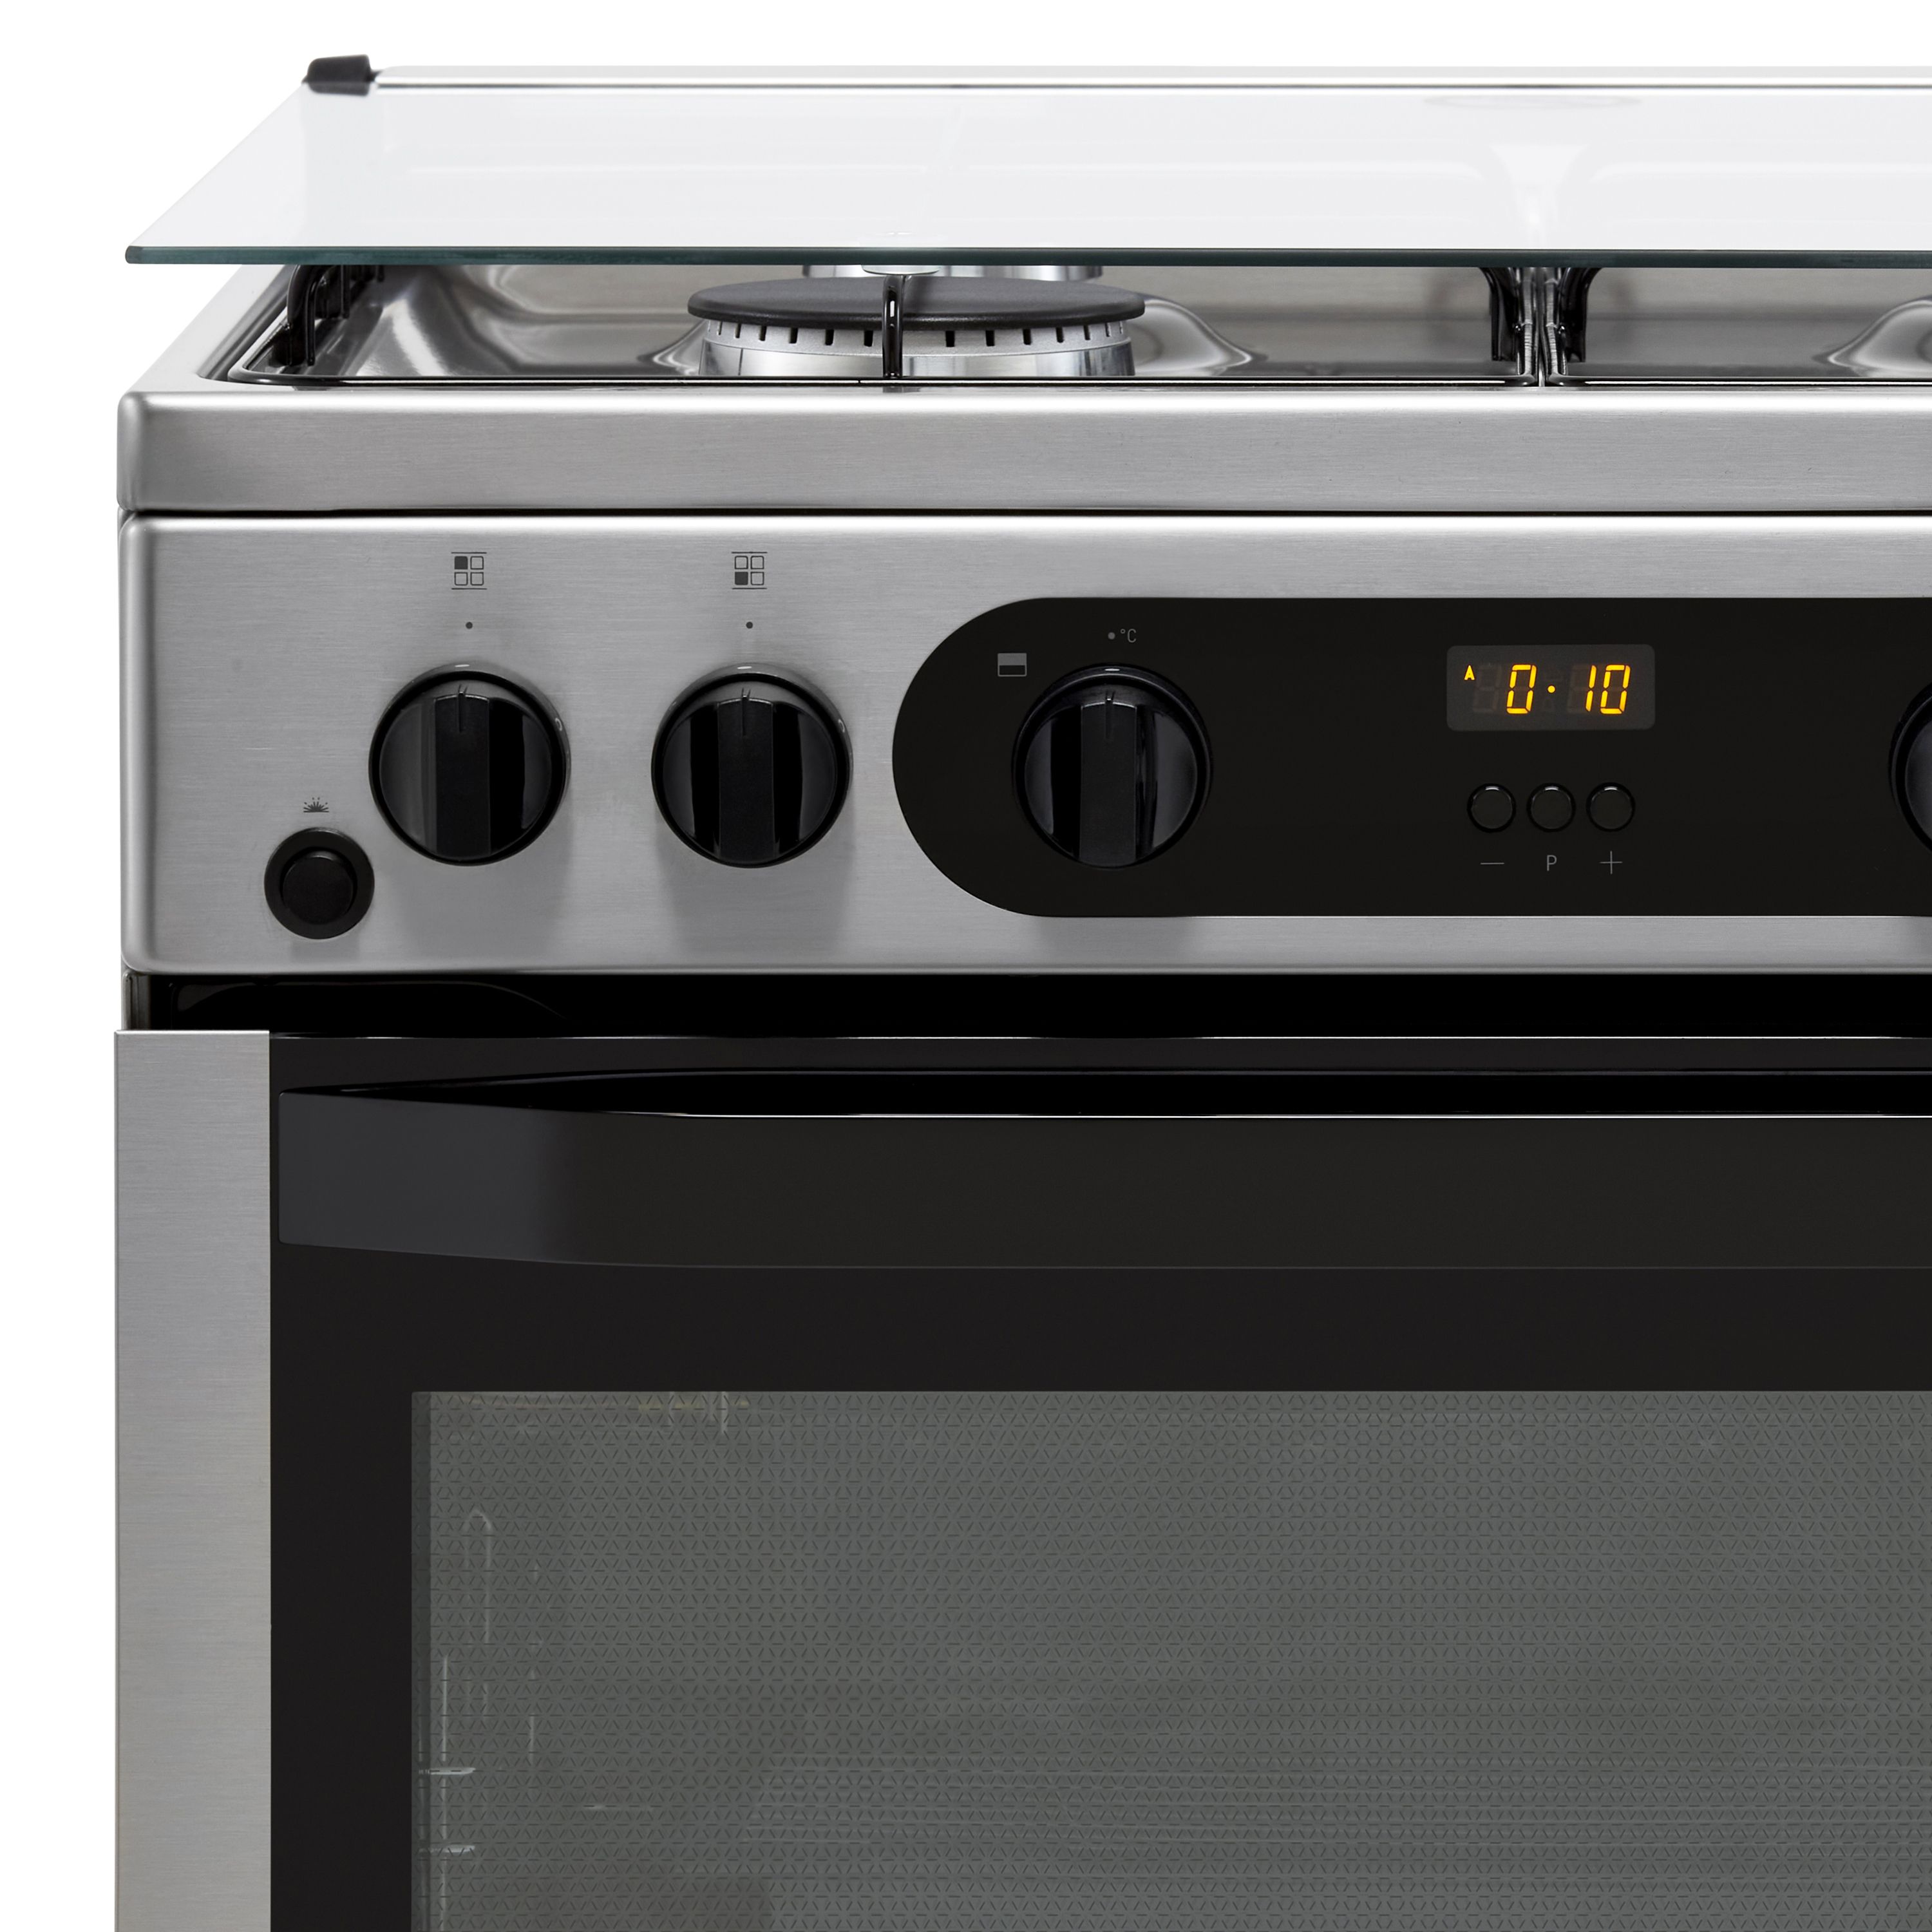 Hotpoint HDM67G0CCX/UK 60cm Double Gas Cooker with Gas Hob